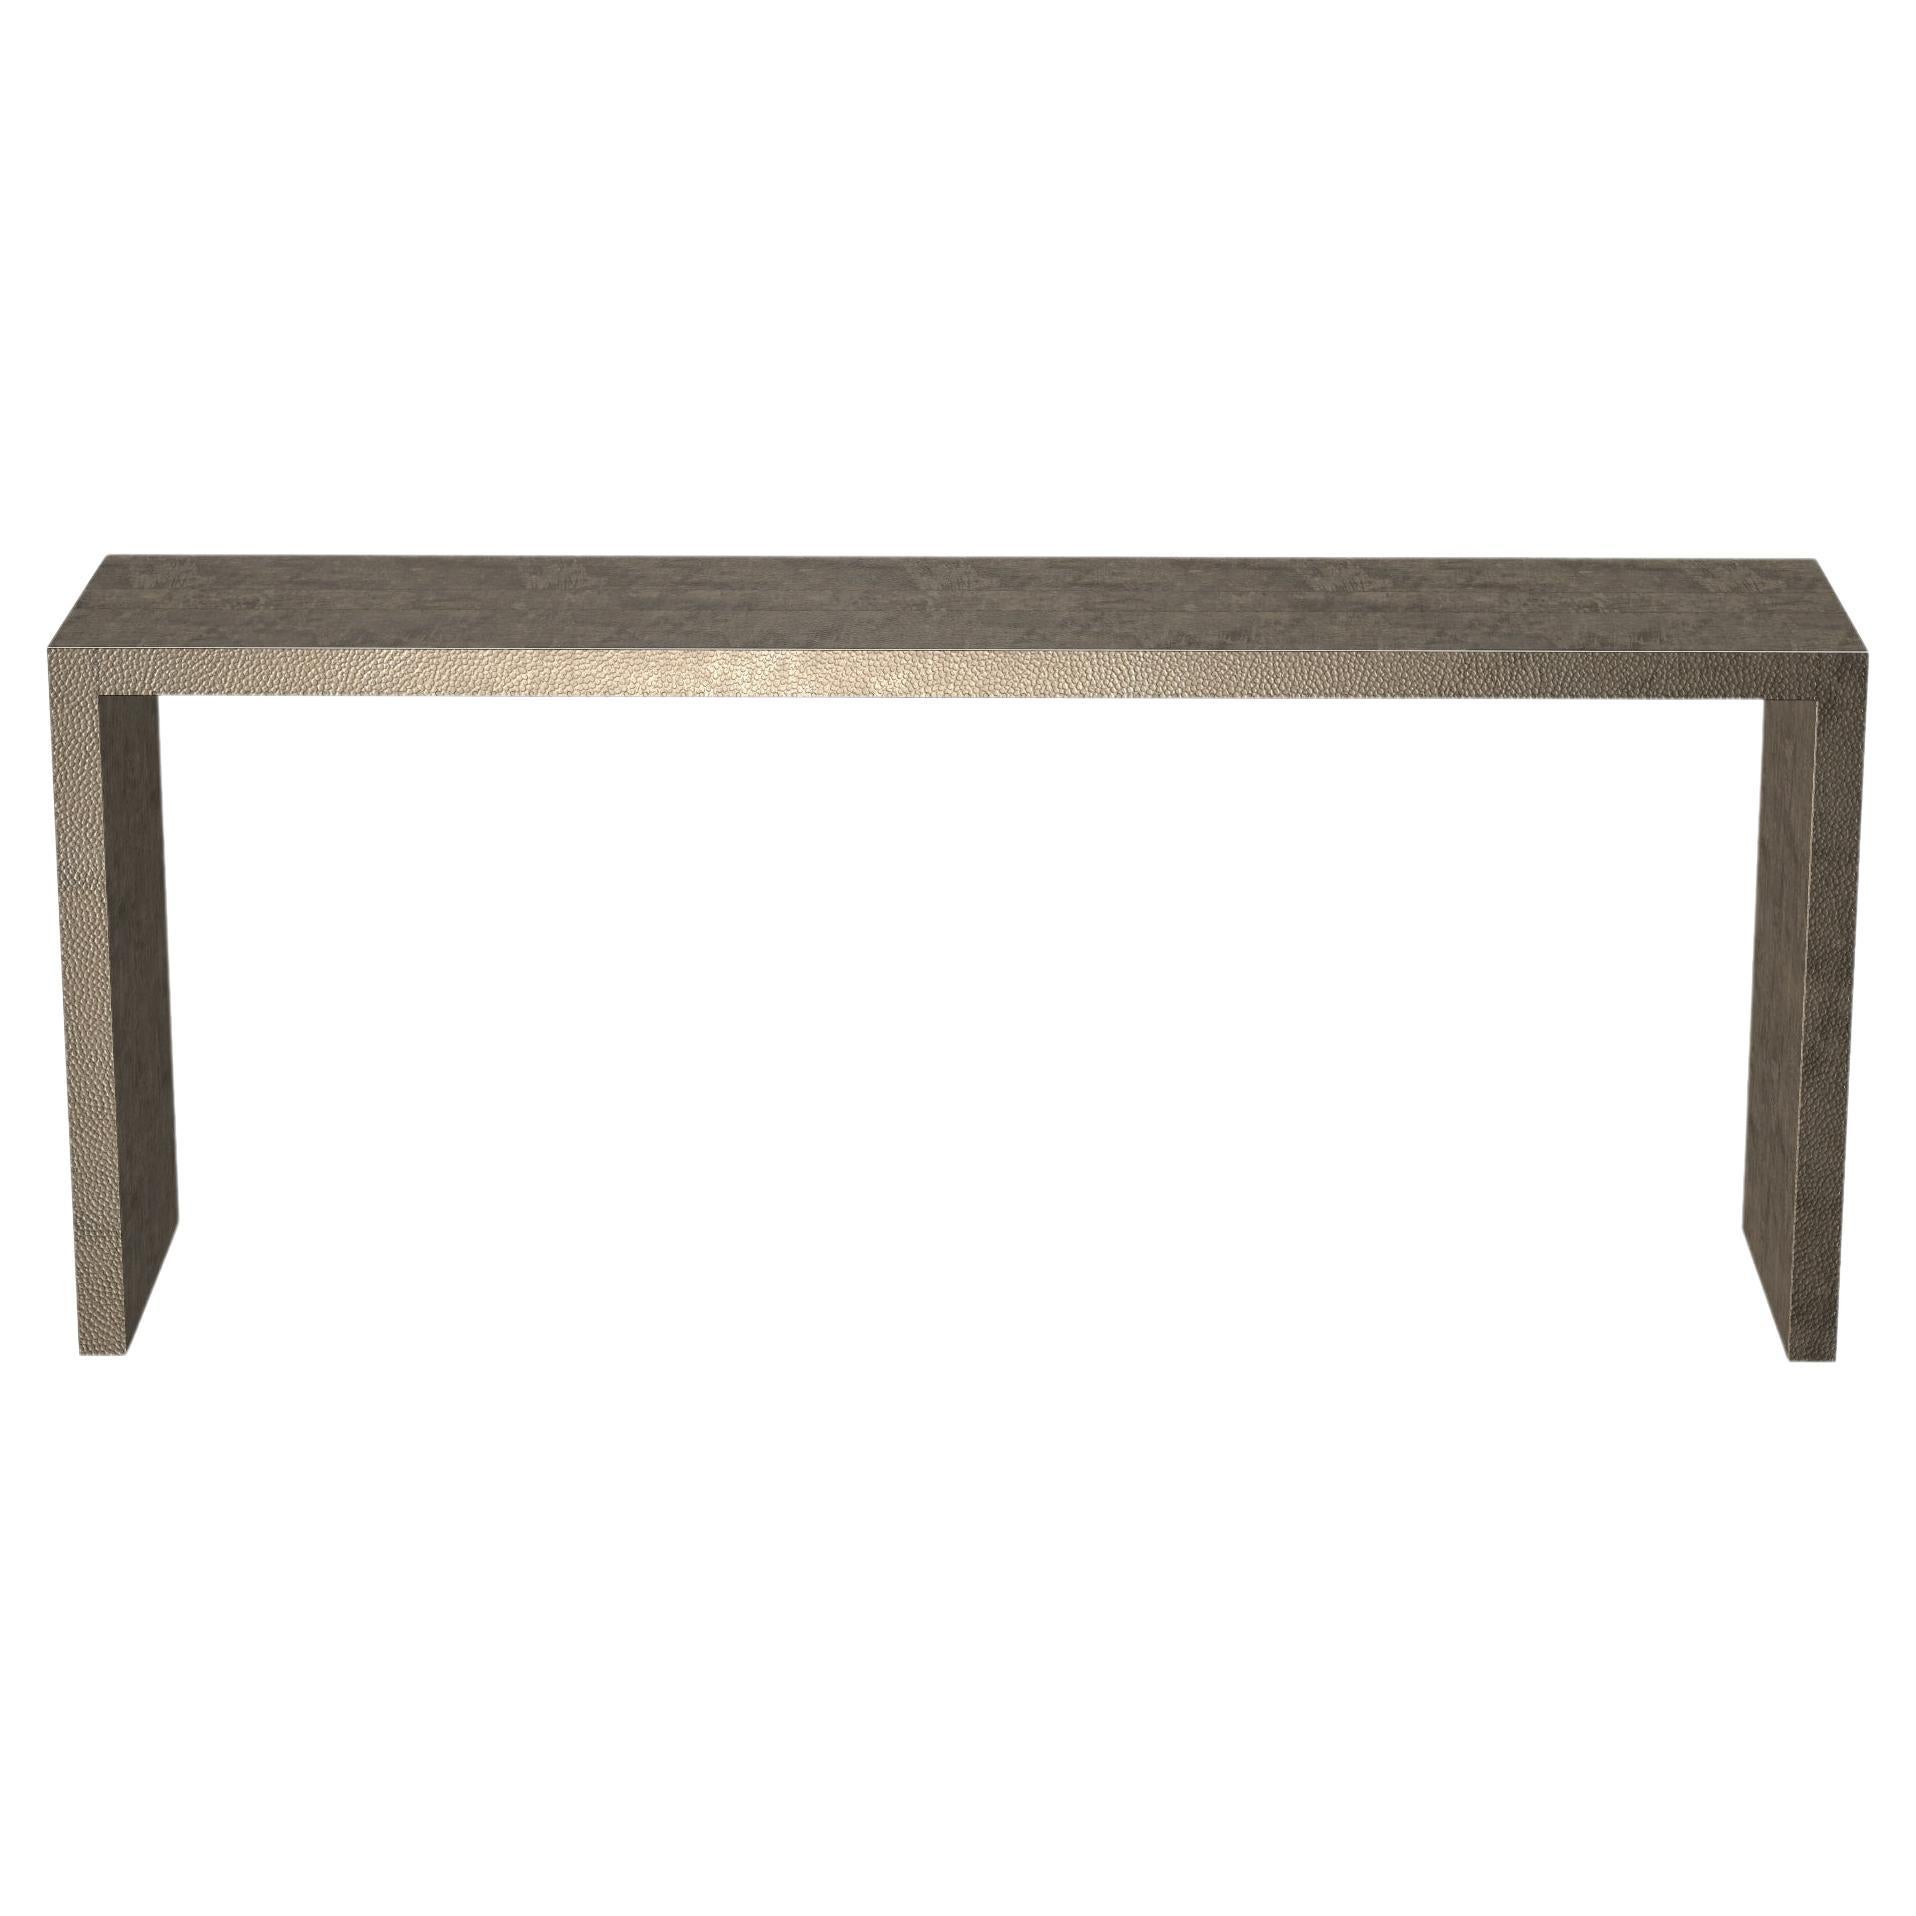 Art Deco Game Console Tables in Antique Bronze Mid. Hammered by Alison Spear